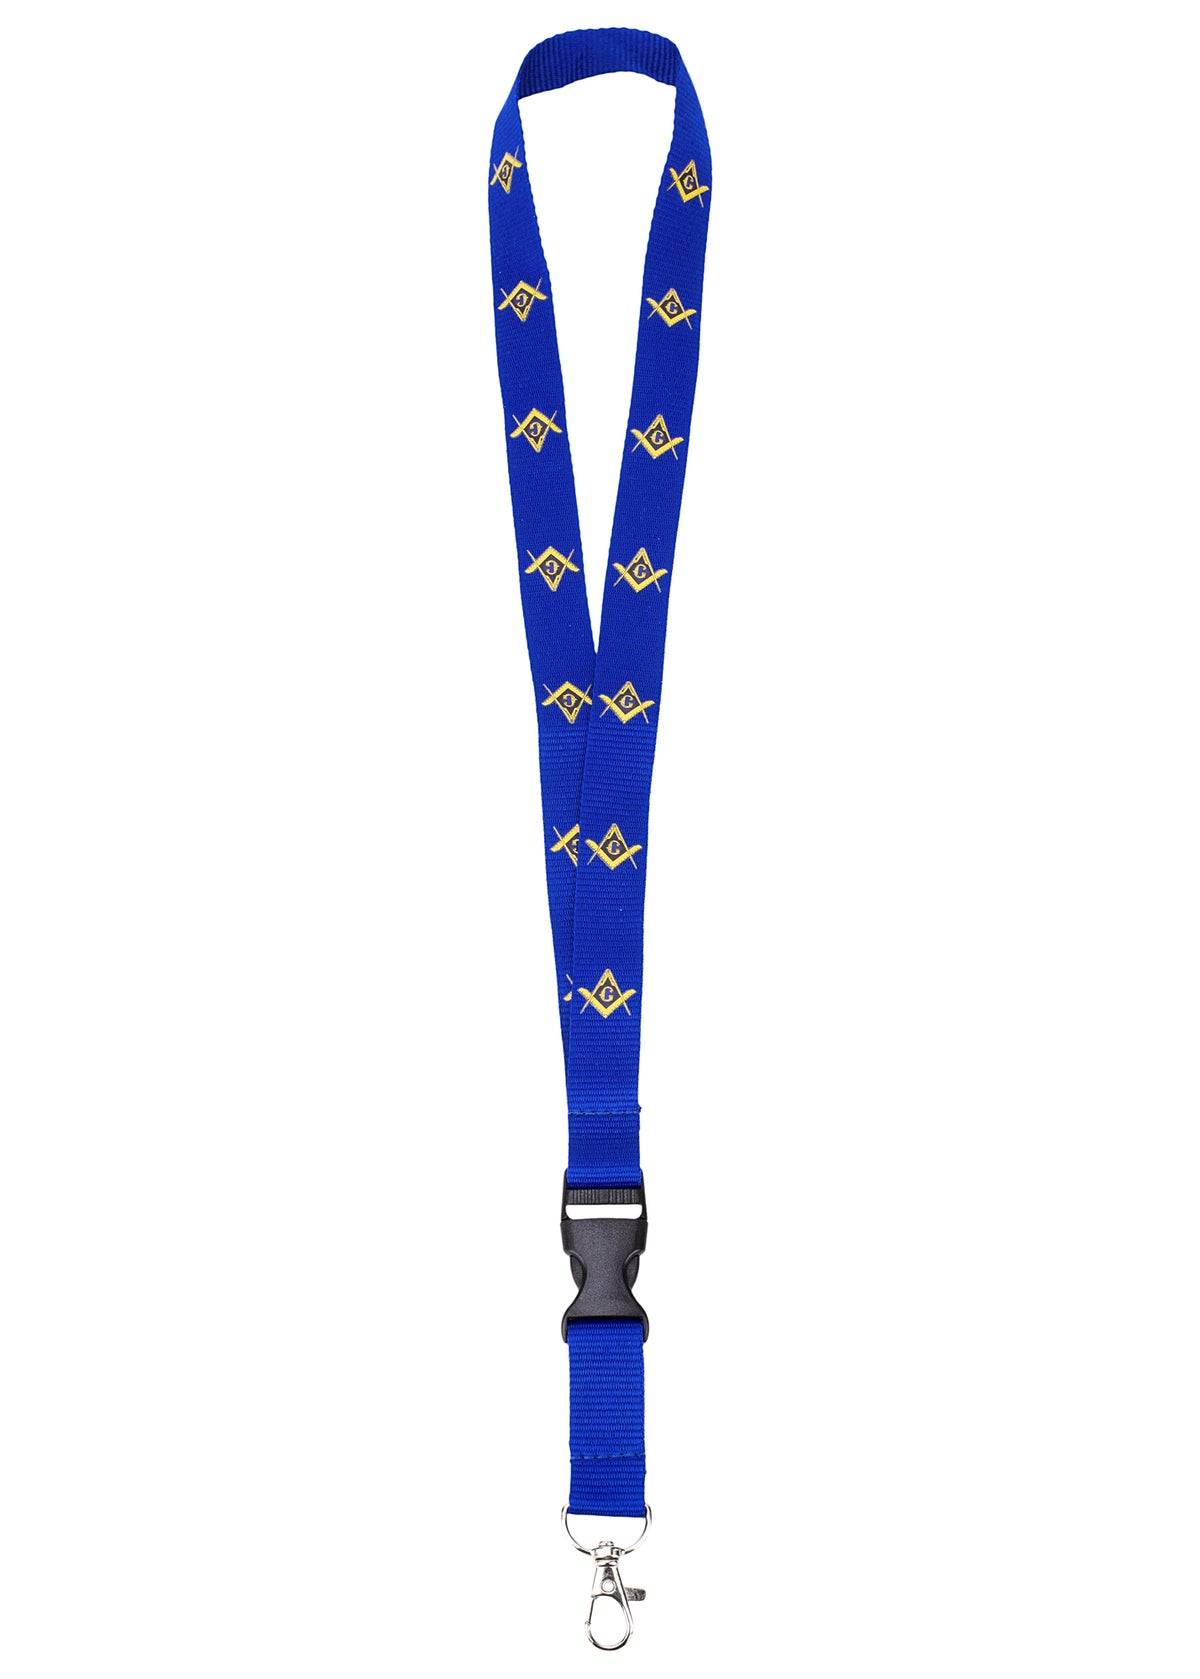 MasonicMan Blue Lanyard with Square and Compass and Clasp